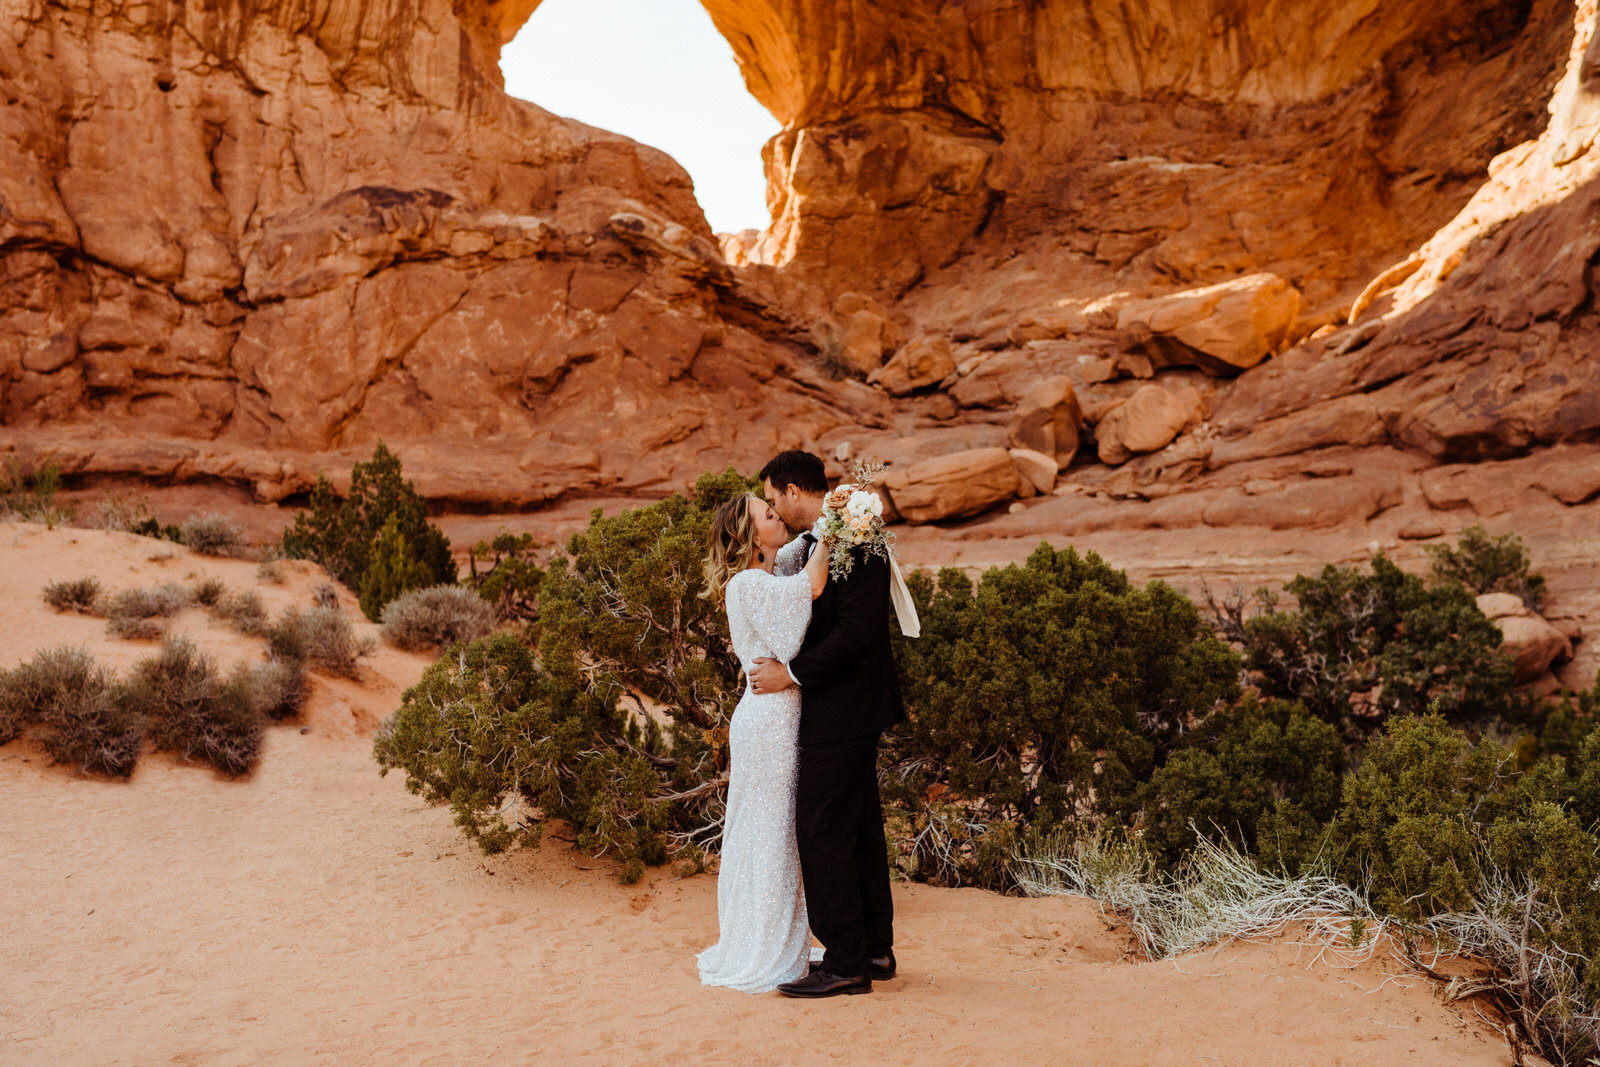 Arches-National-Park-Wedding-Glamorous-Bride-and-Groom-on-Trail (4).jpg